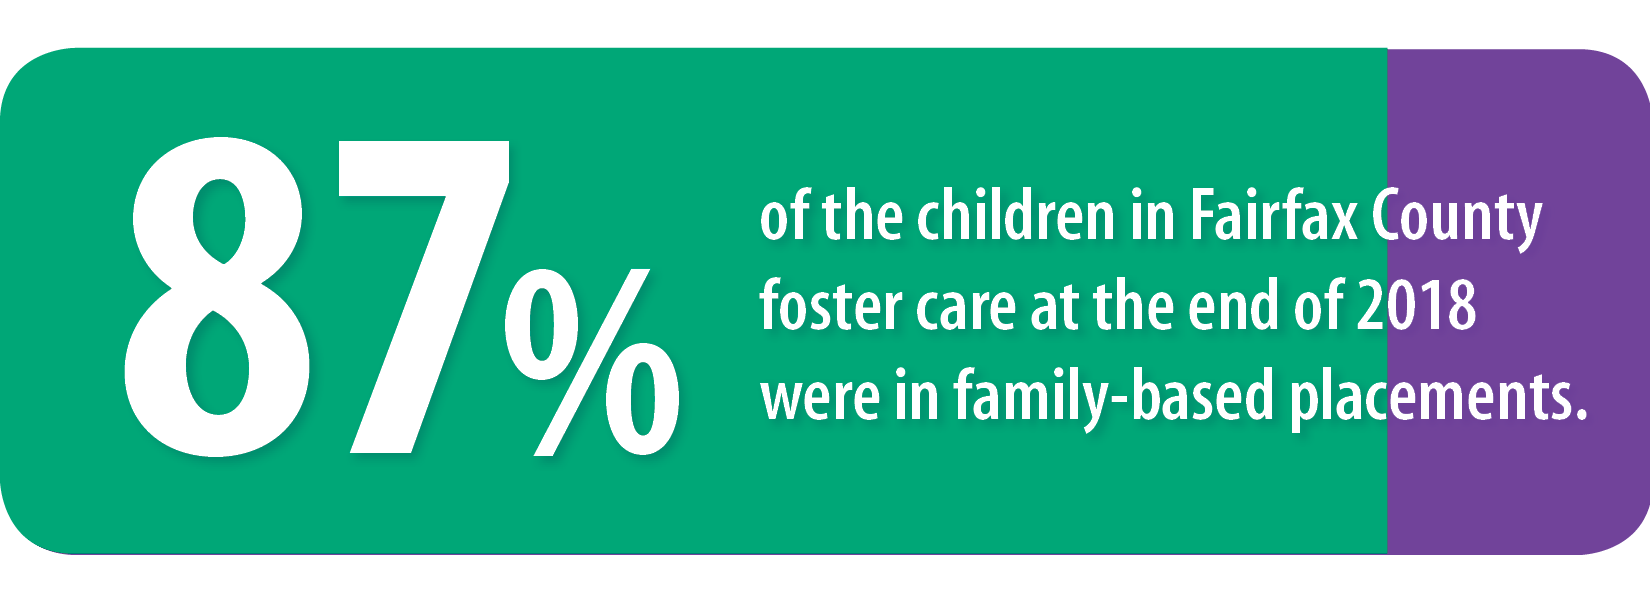 Story in Stats graphic - At the end of 2018, 87% of Fairfax Children in foster care were in Family-Based Placements